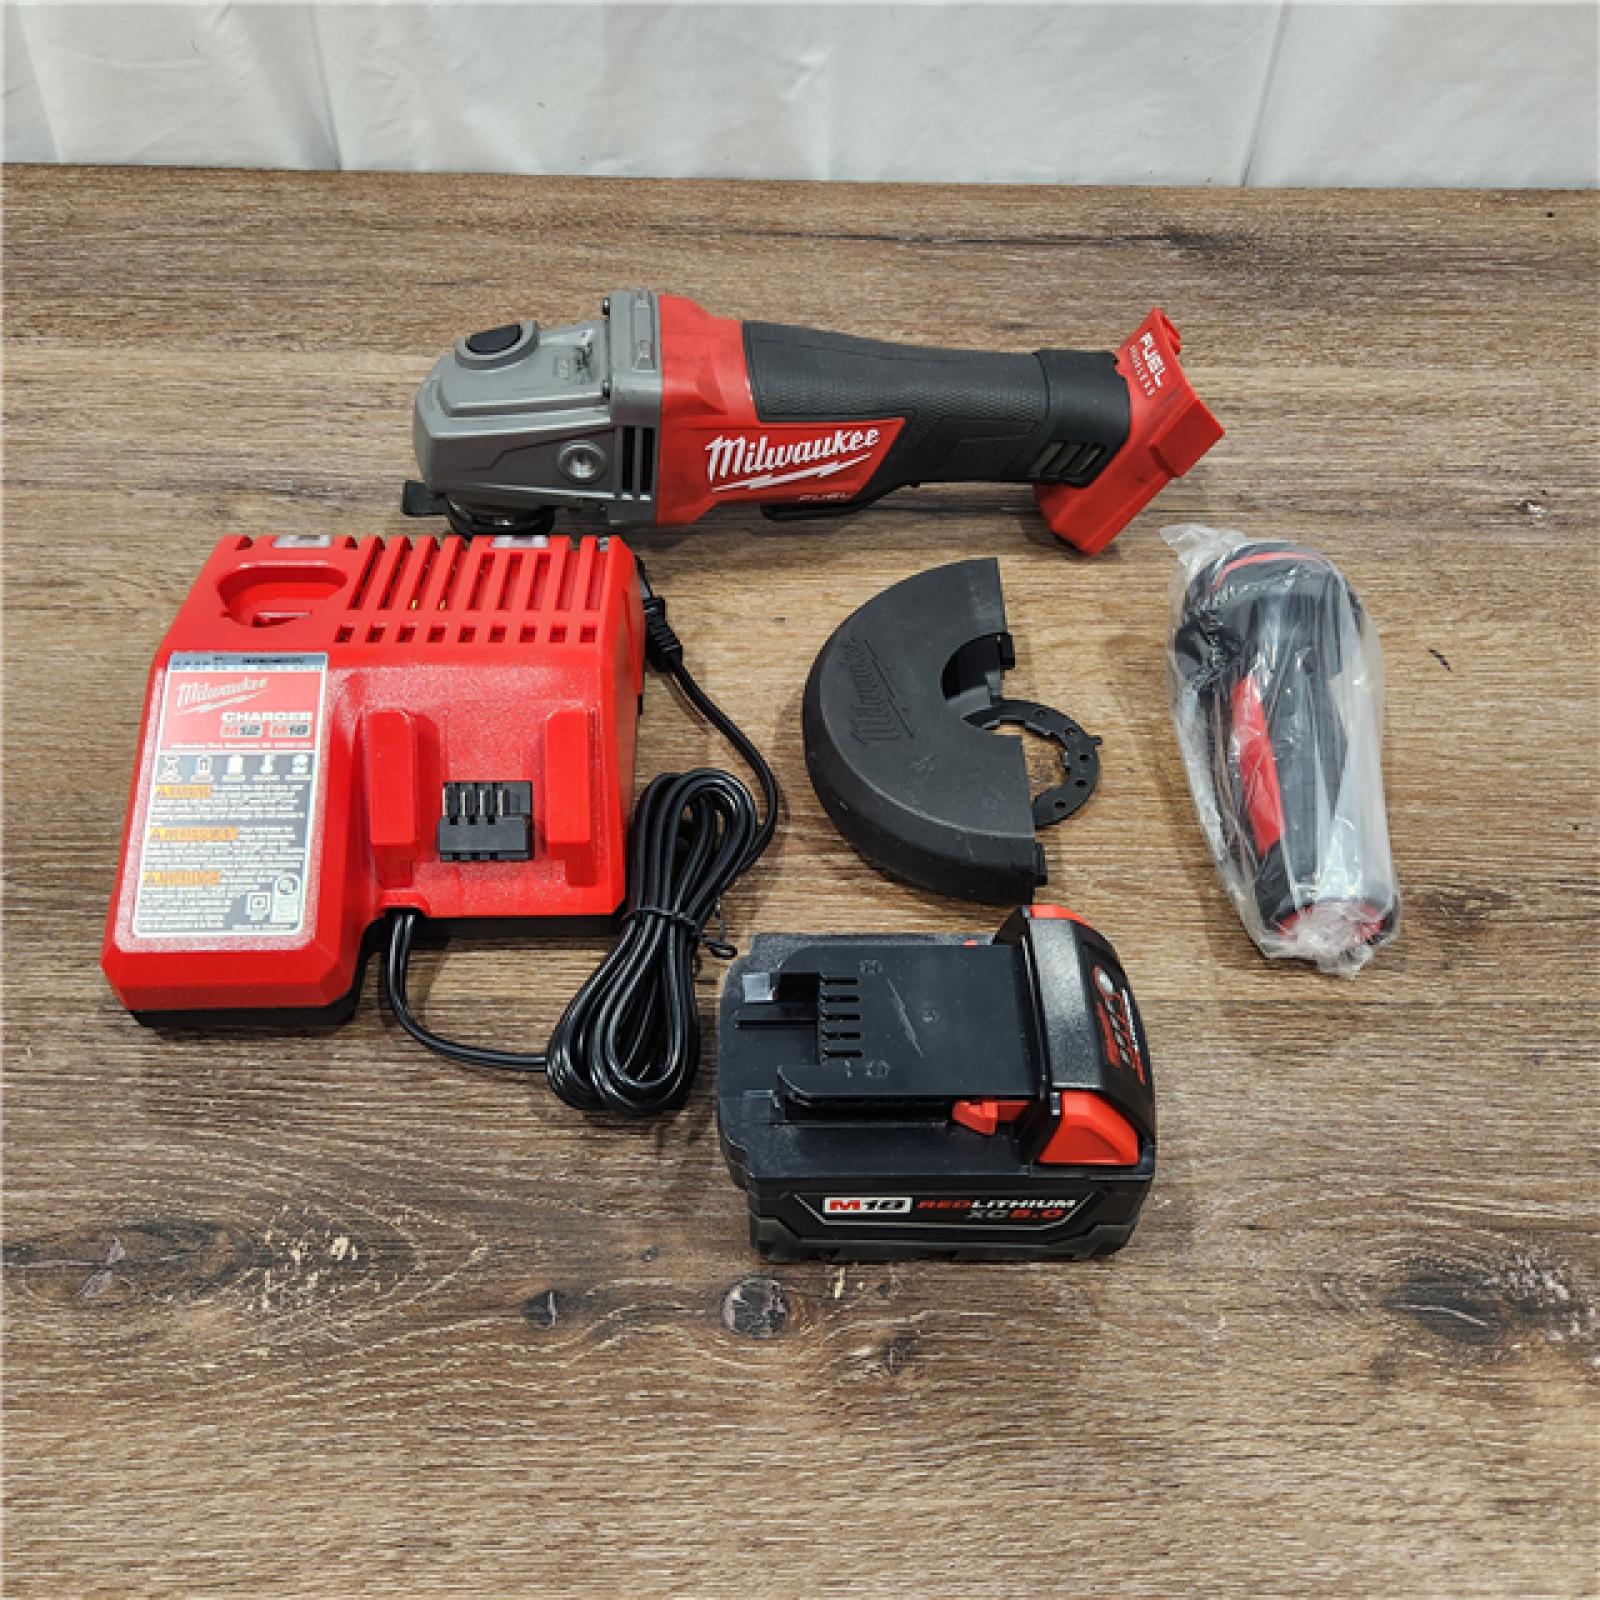 AS-IS M18 FUEL 18-Volt Lithium-Ion Brushless Cordless 4-1/2 in. /5 in. Grinder W/ Paddle Switch Kit W/ (2) 5.0Ah Batteries